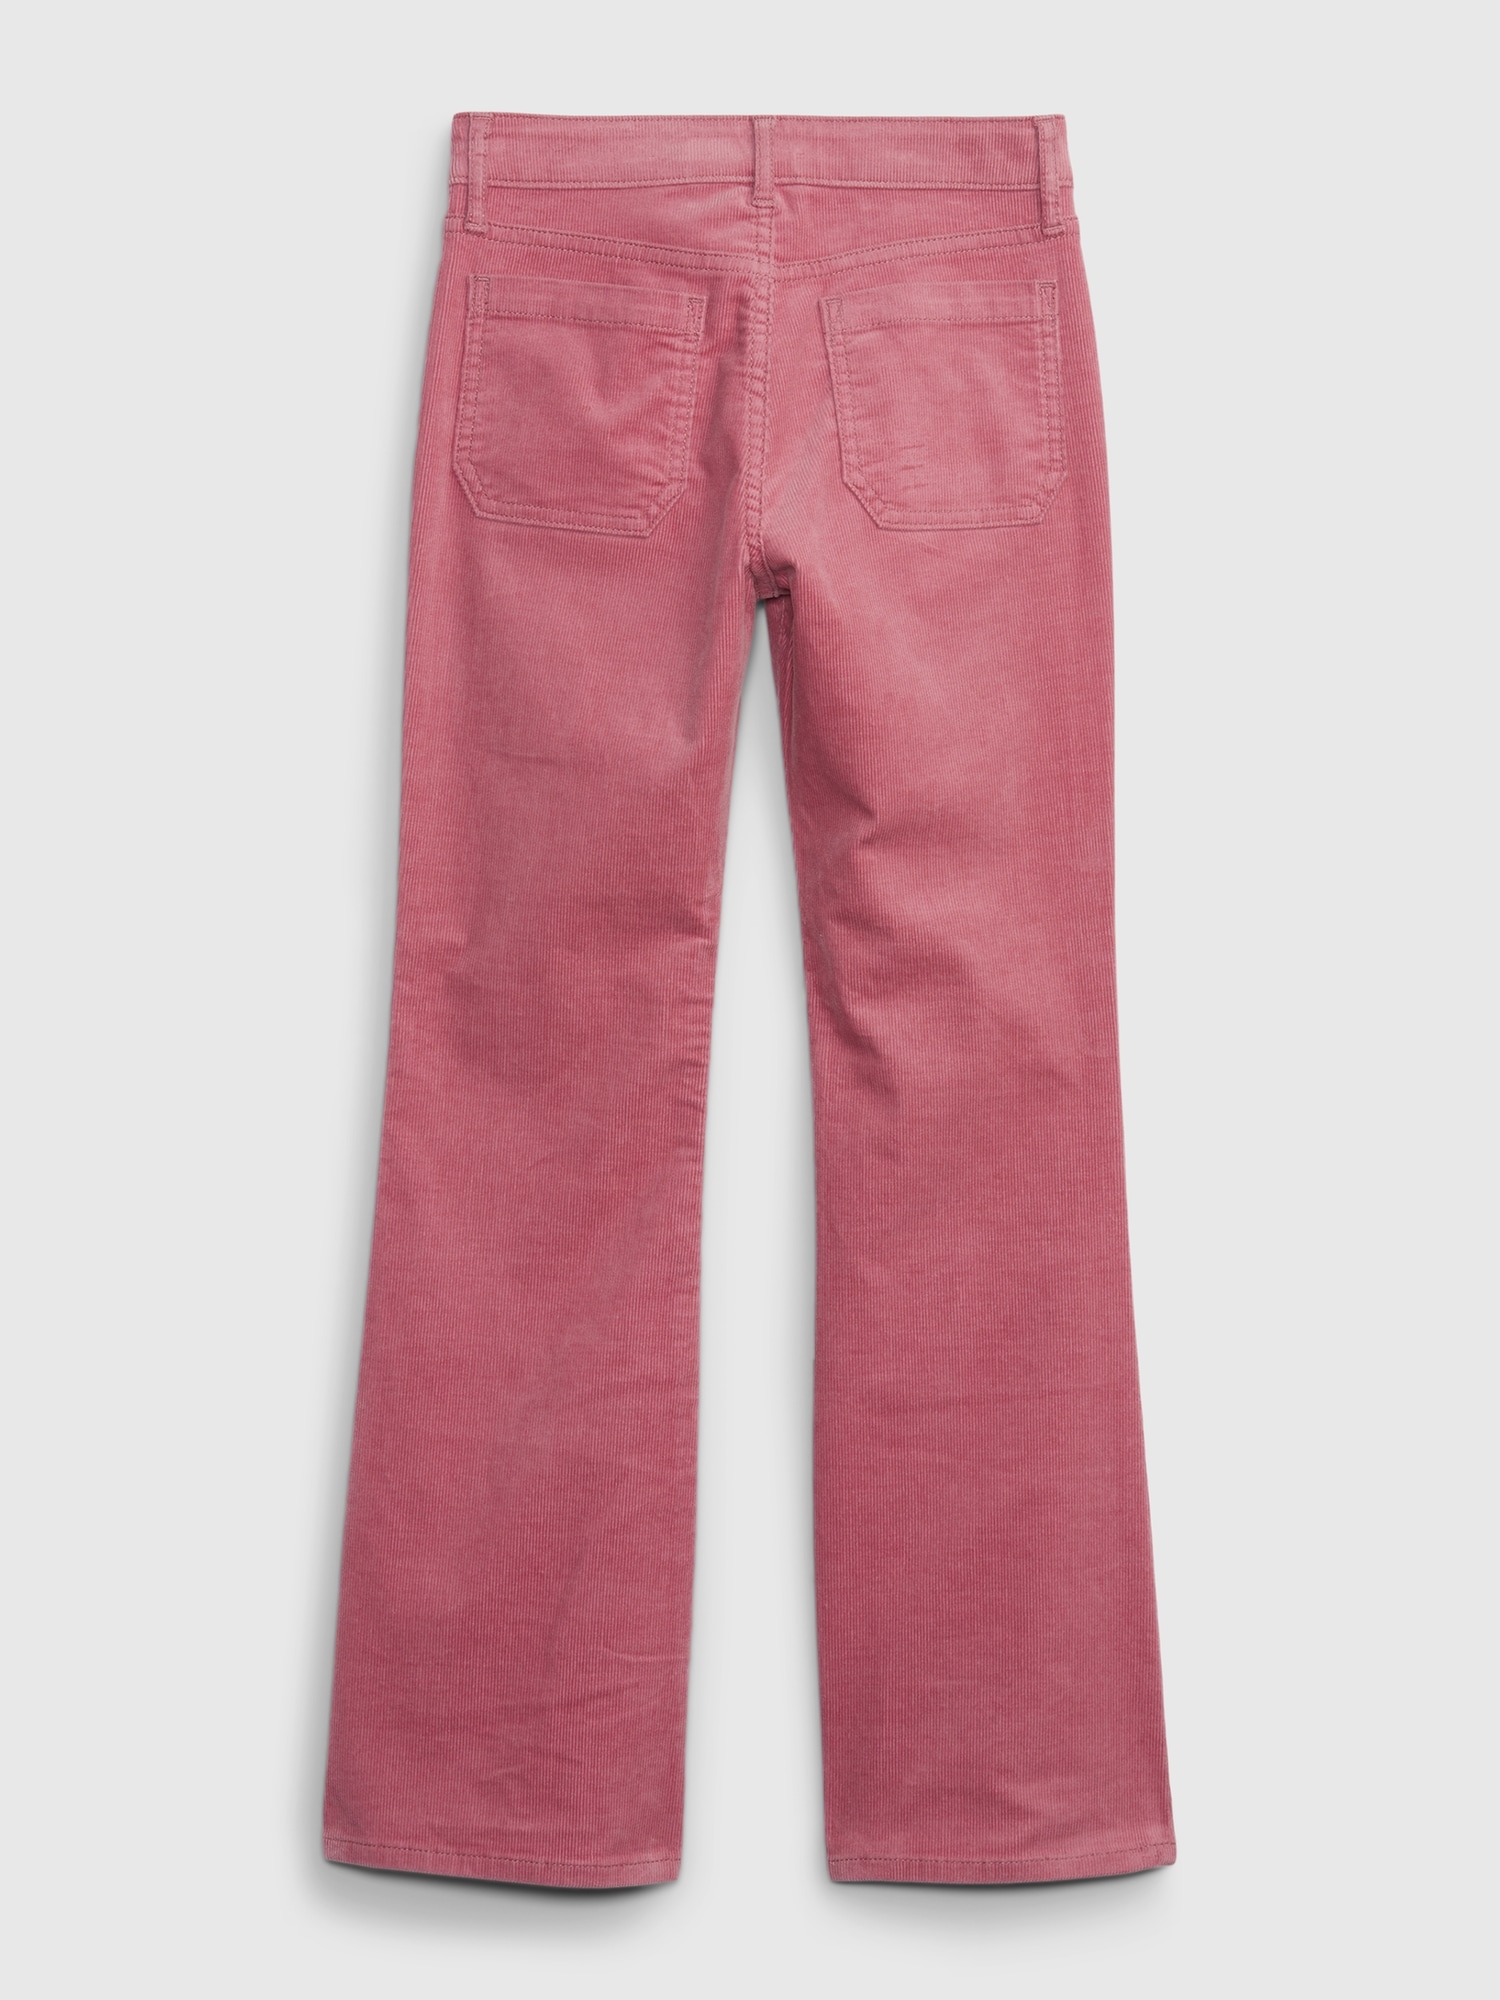 Kids High Rise Corduroy '70s Flare Jeans